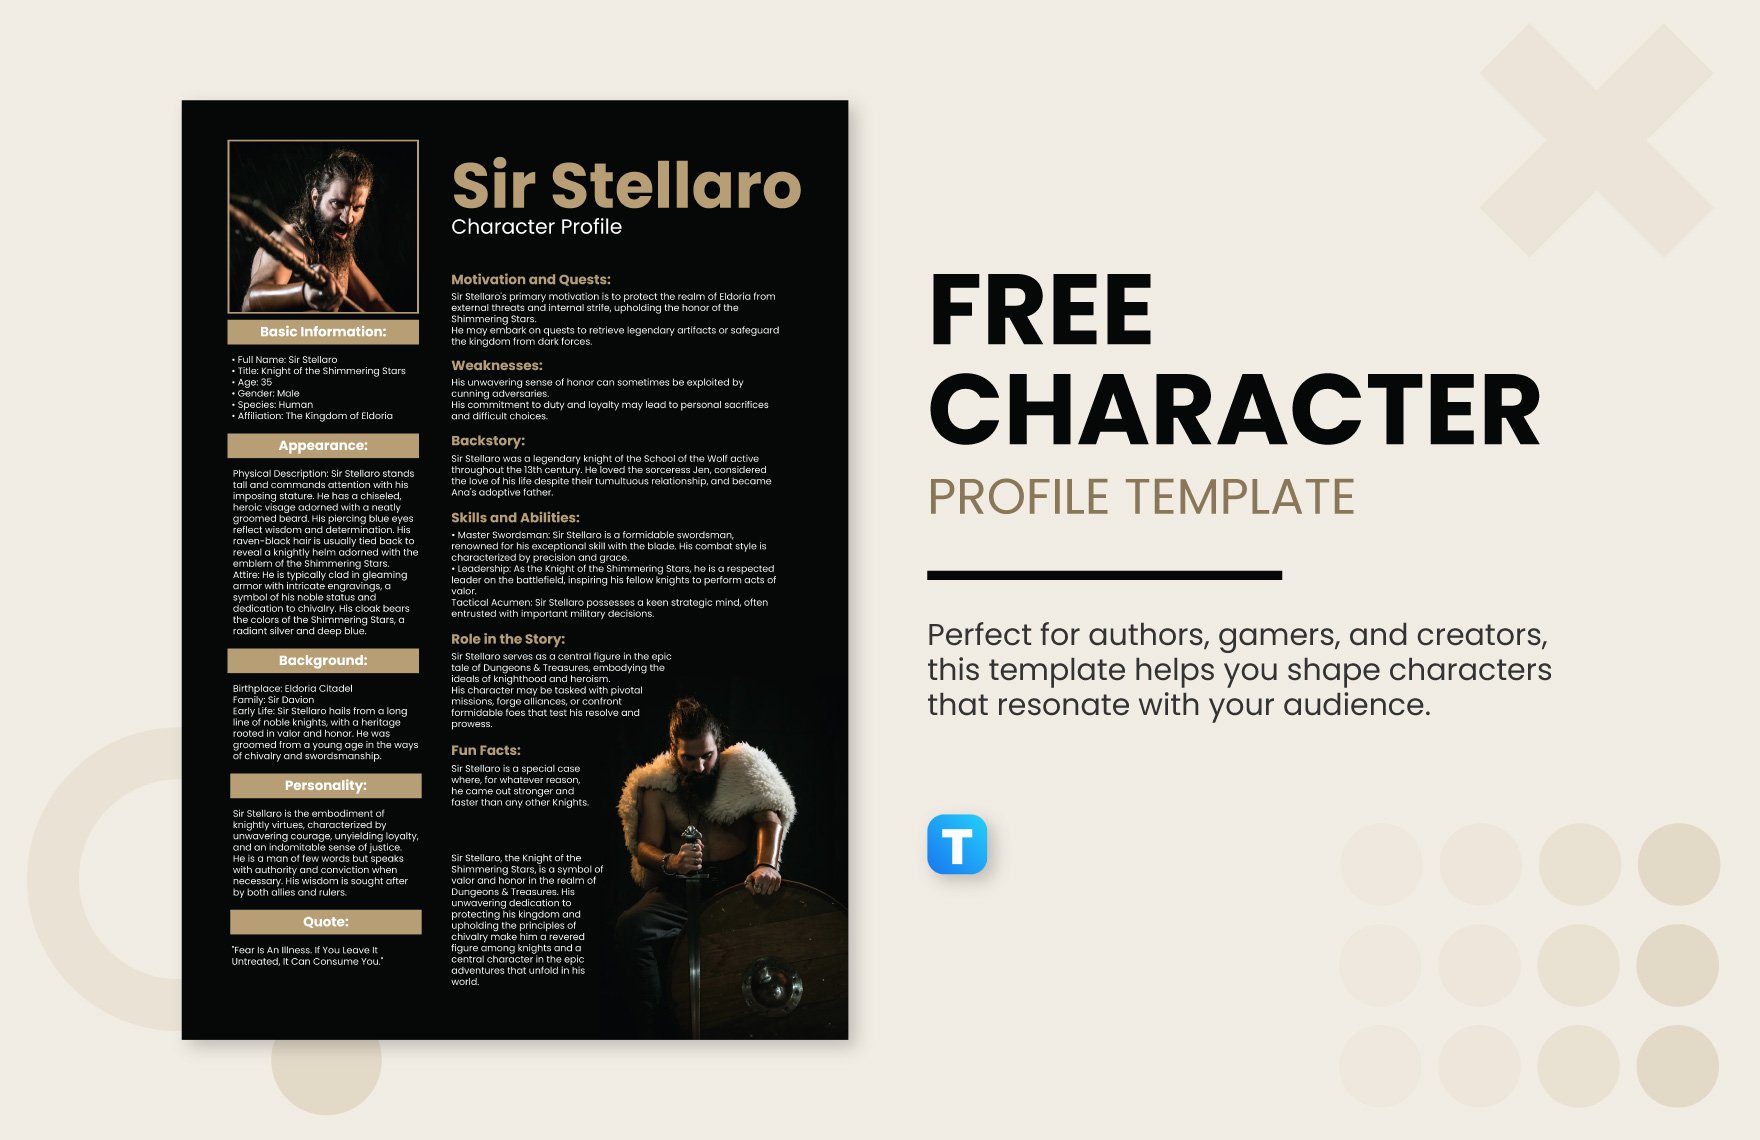 Free Character Profile Template Download in PNG, JPG